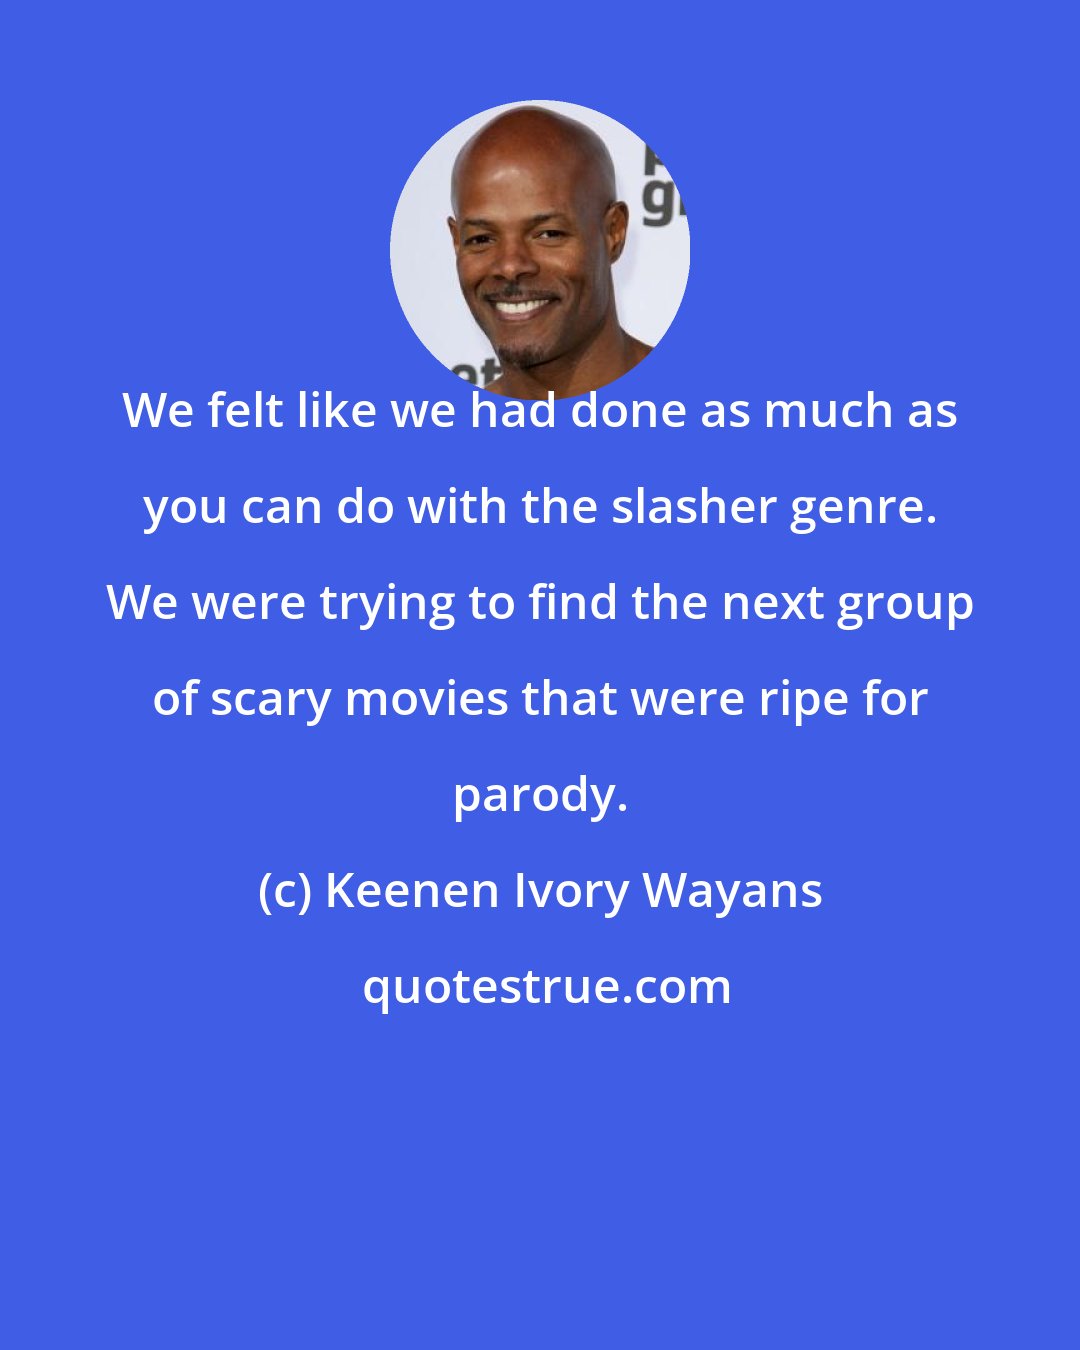 Keenen Ivory Wayans: We felt like we had done as much as you can do with the slasher genre. We were trying to find the next group of scary movies that were ripe for parody.